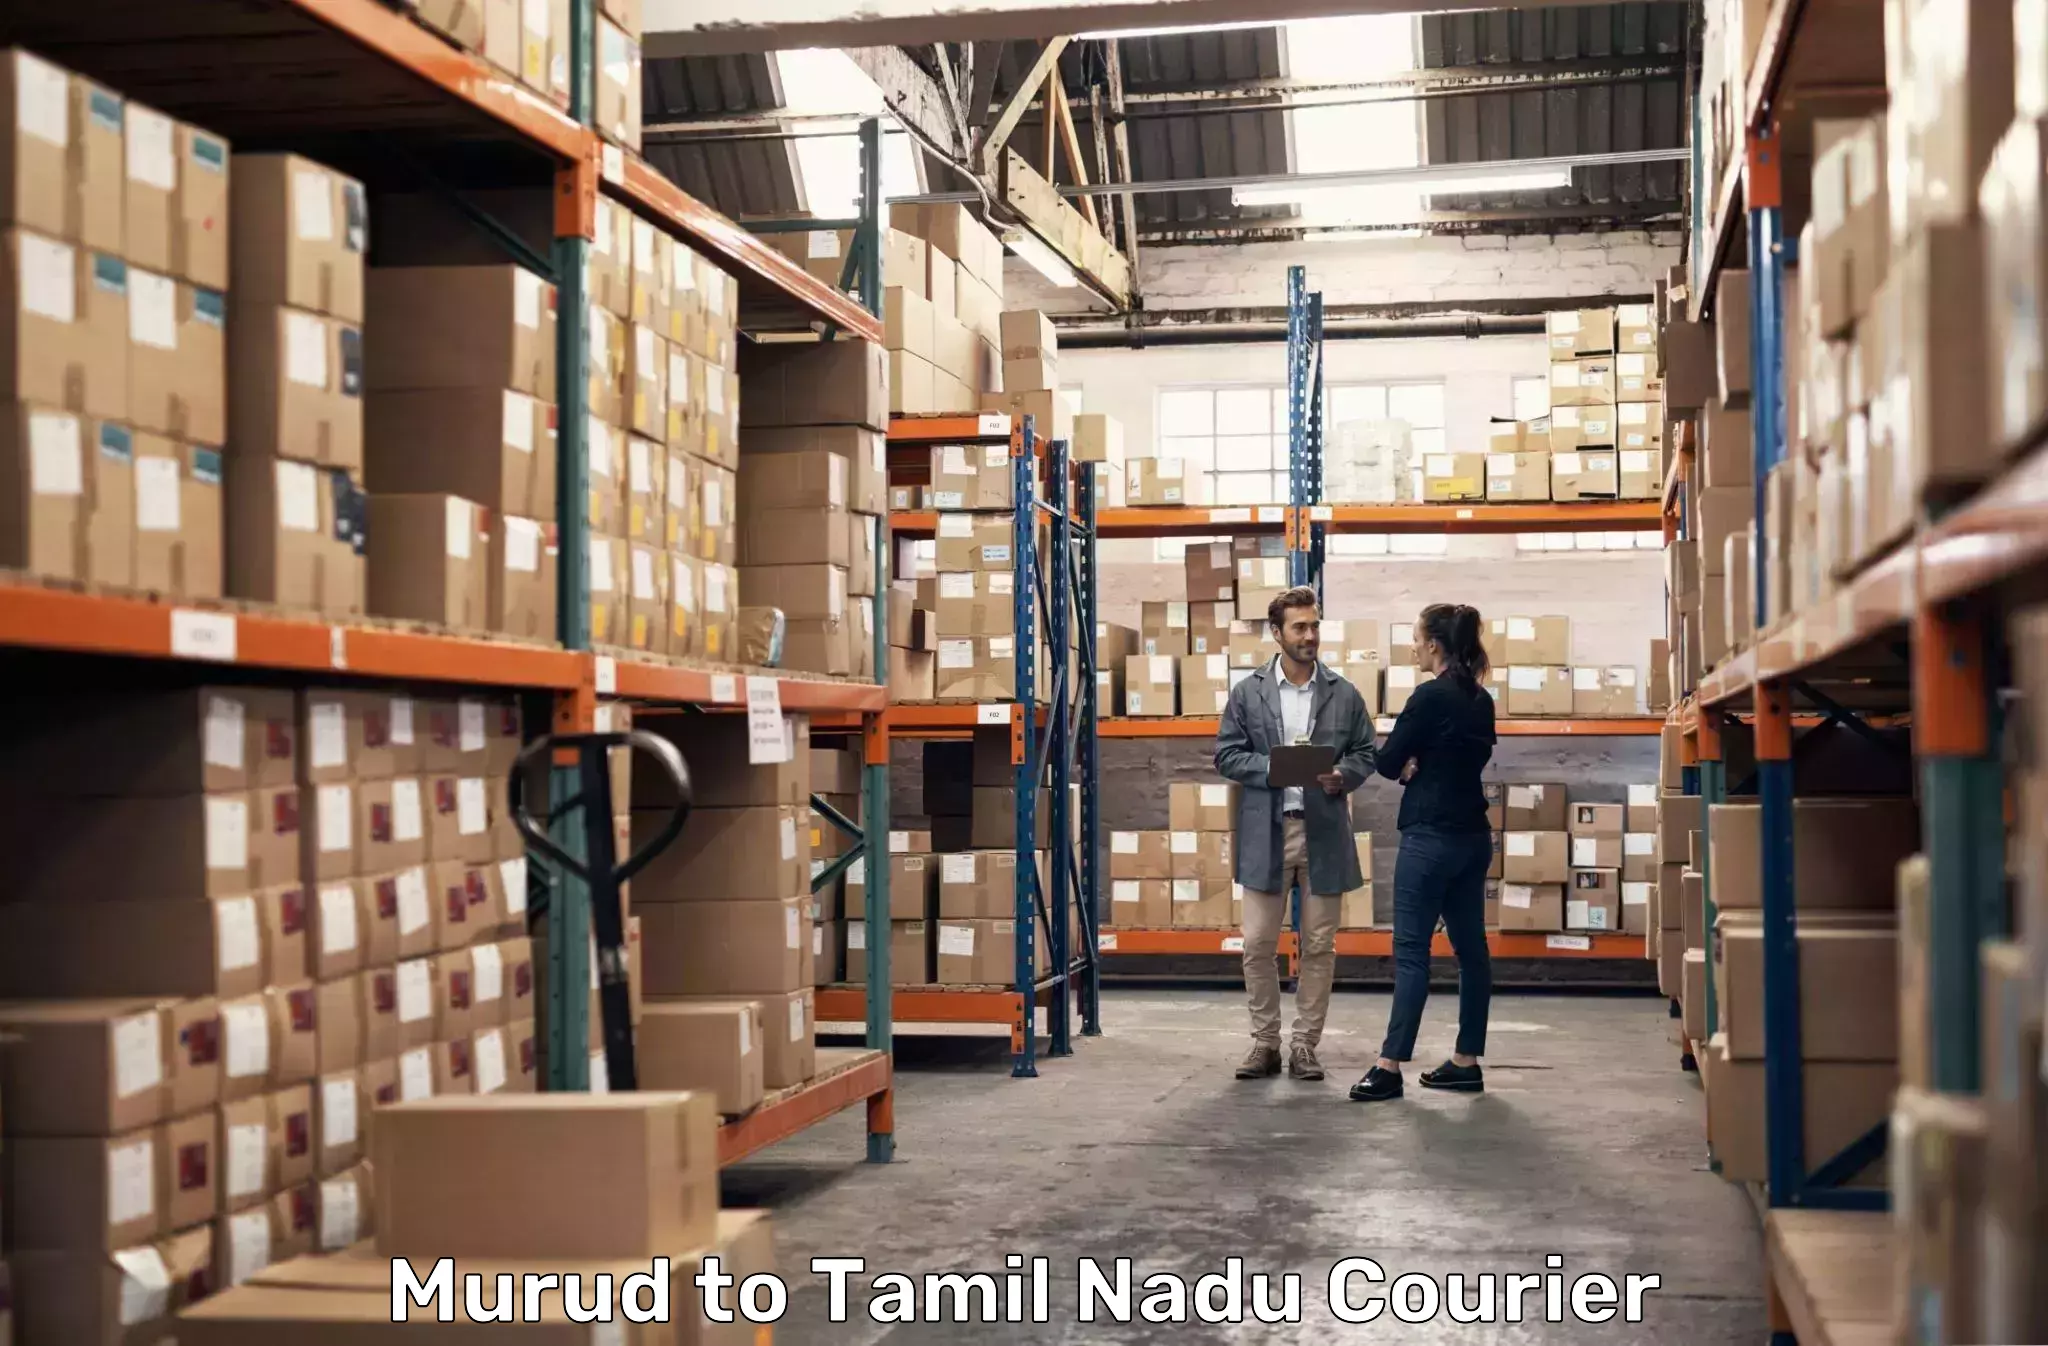 Courier service innovation Murud to Ennore Port Chennai